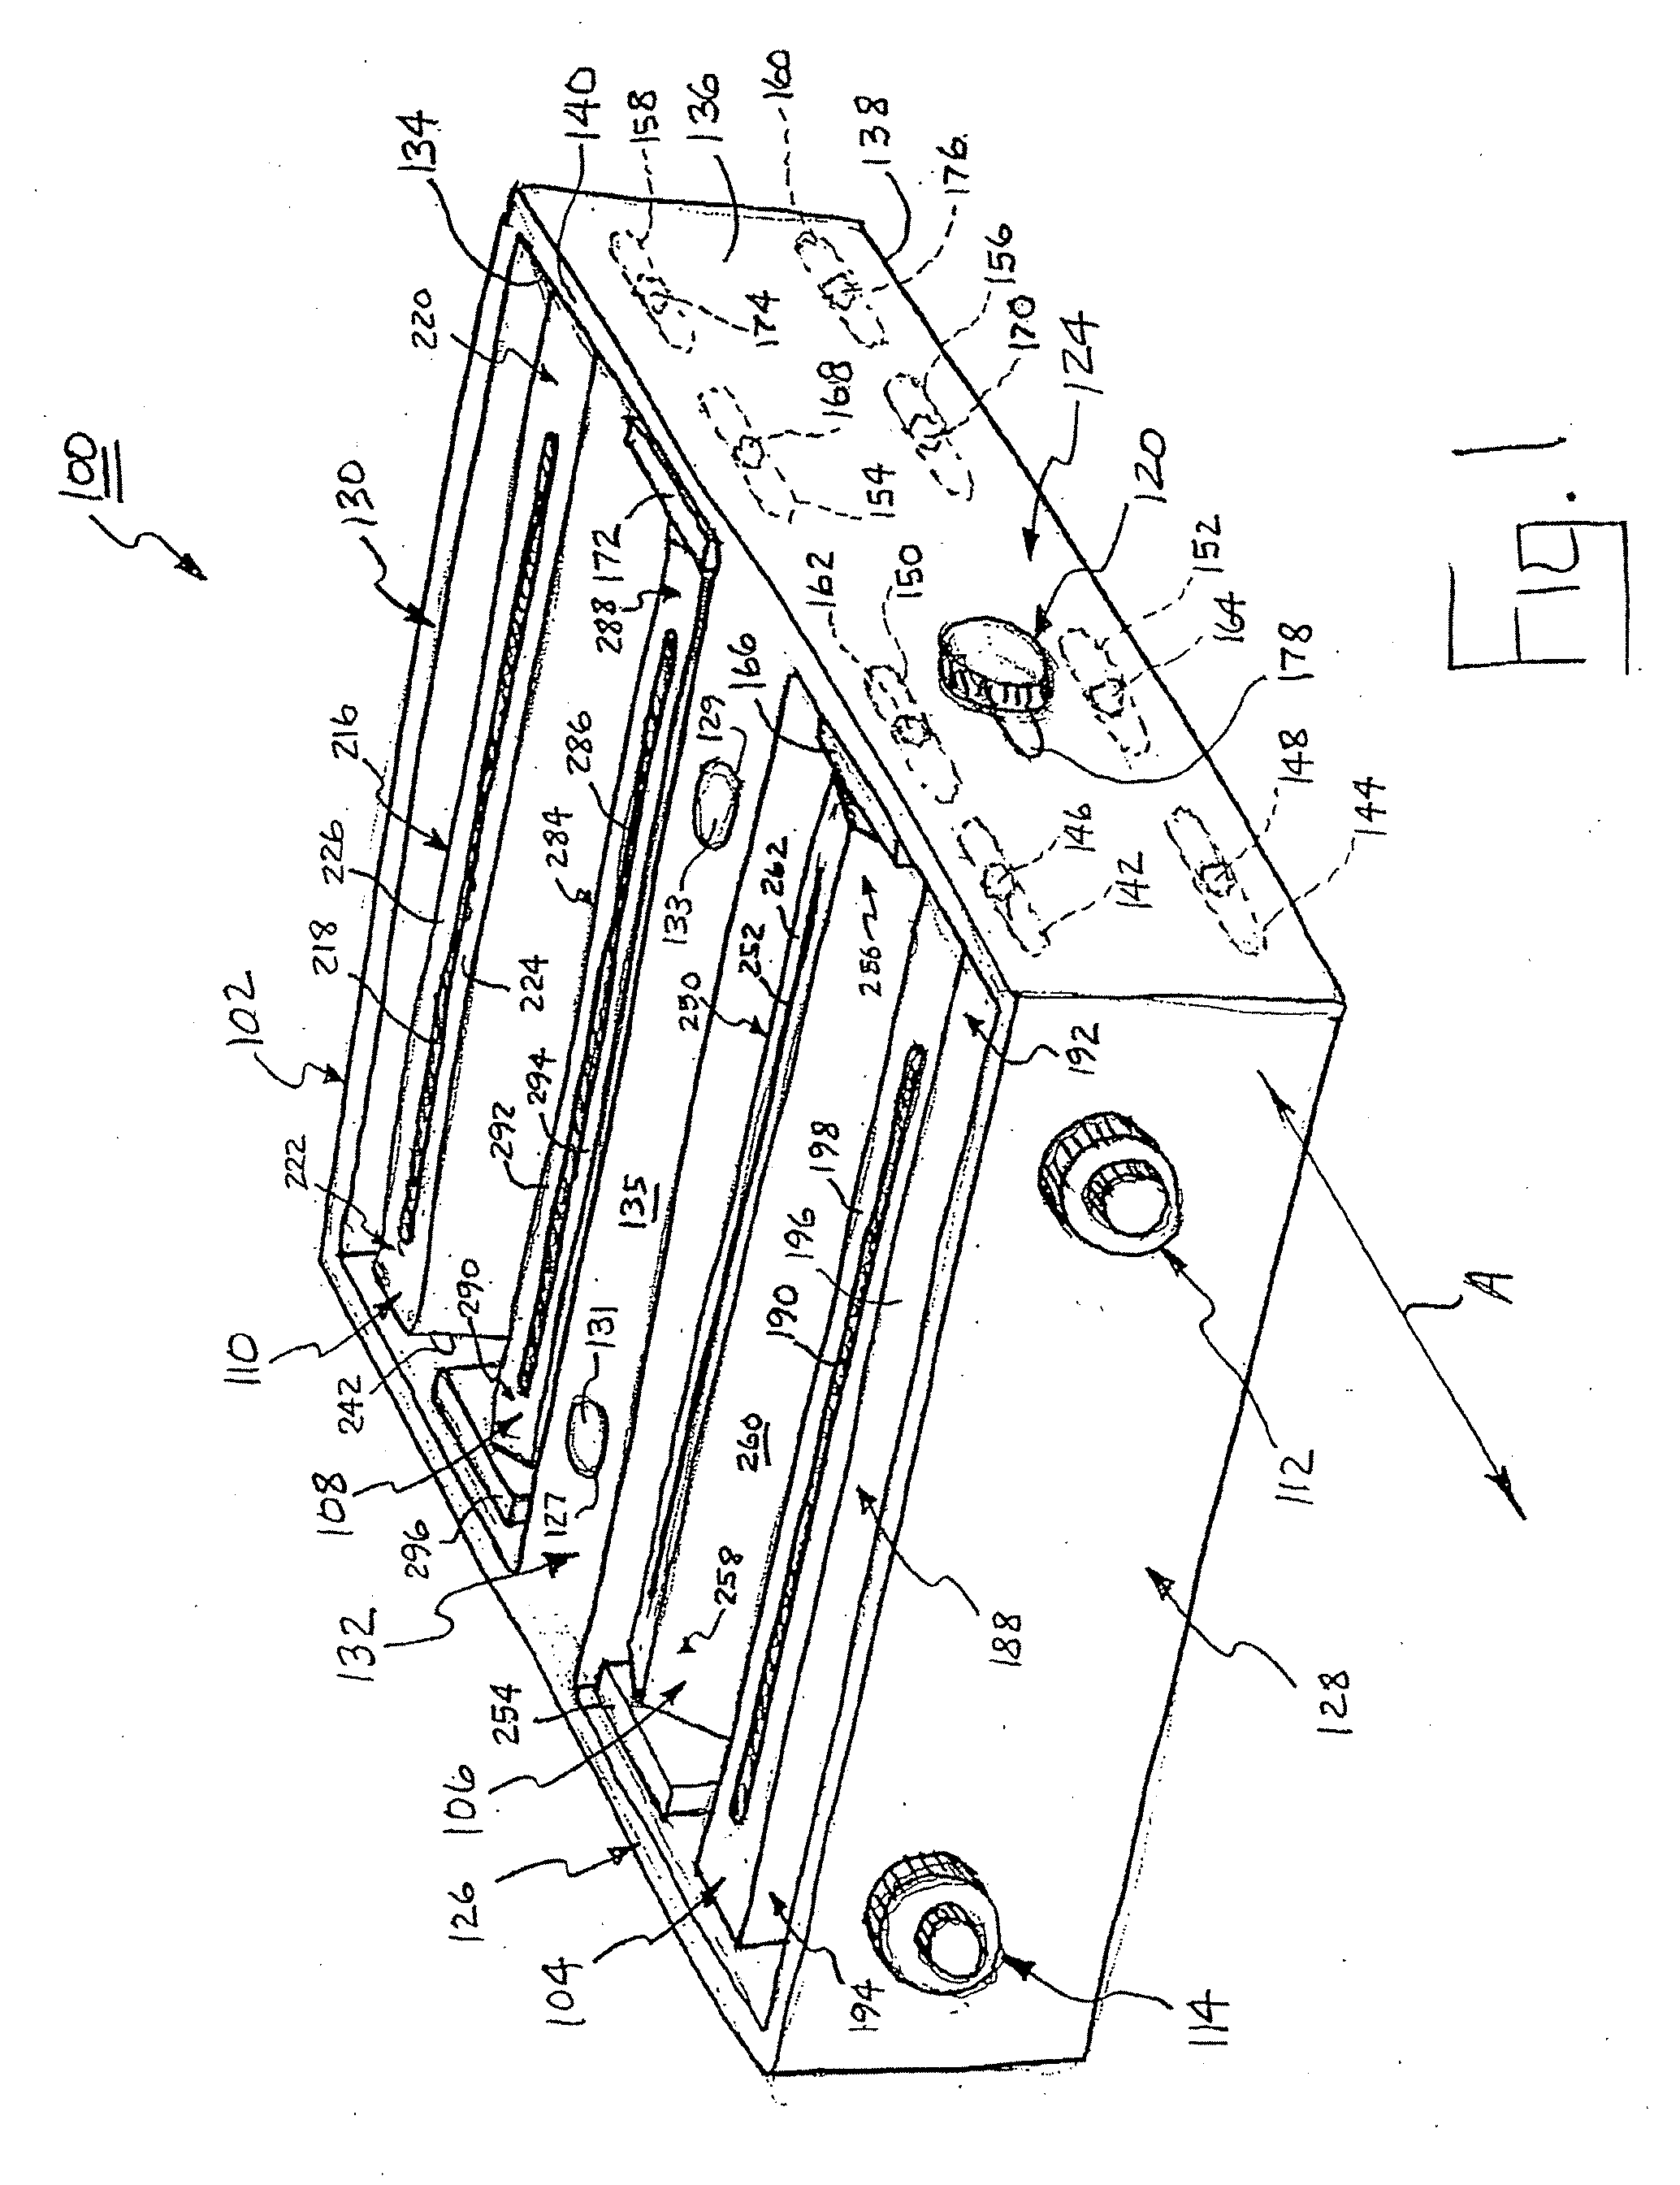 Cutting block for surgical navigation